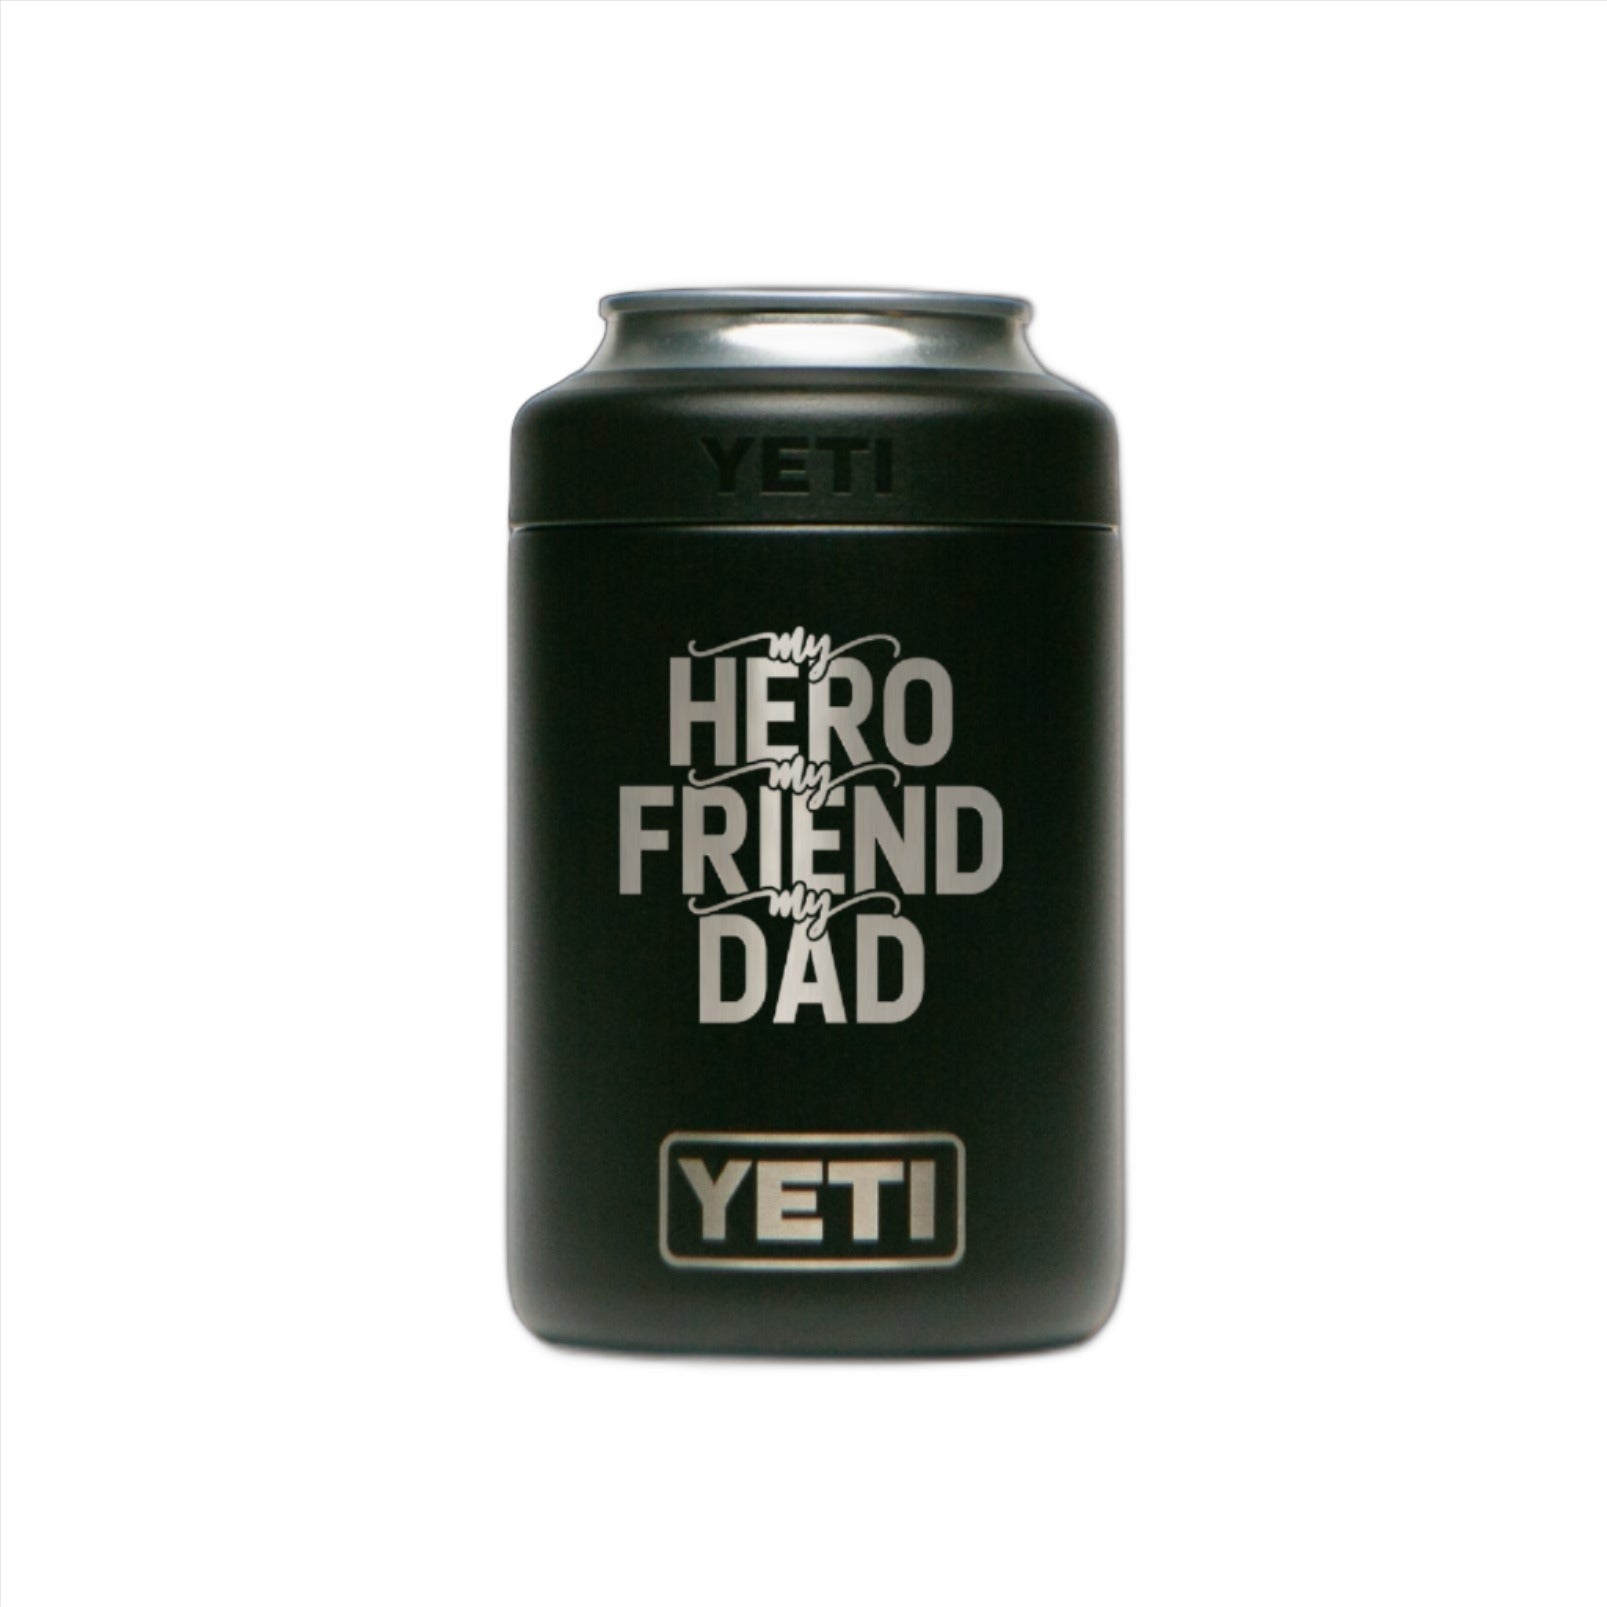 Personalized Stainless Steel Can Cooler, Double wall Insulated, Custom Bottle  Holder, Engraved can cooler, Can Holder YETI style